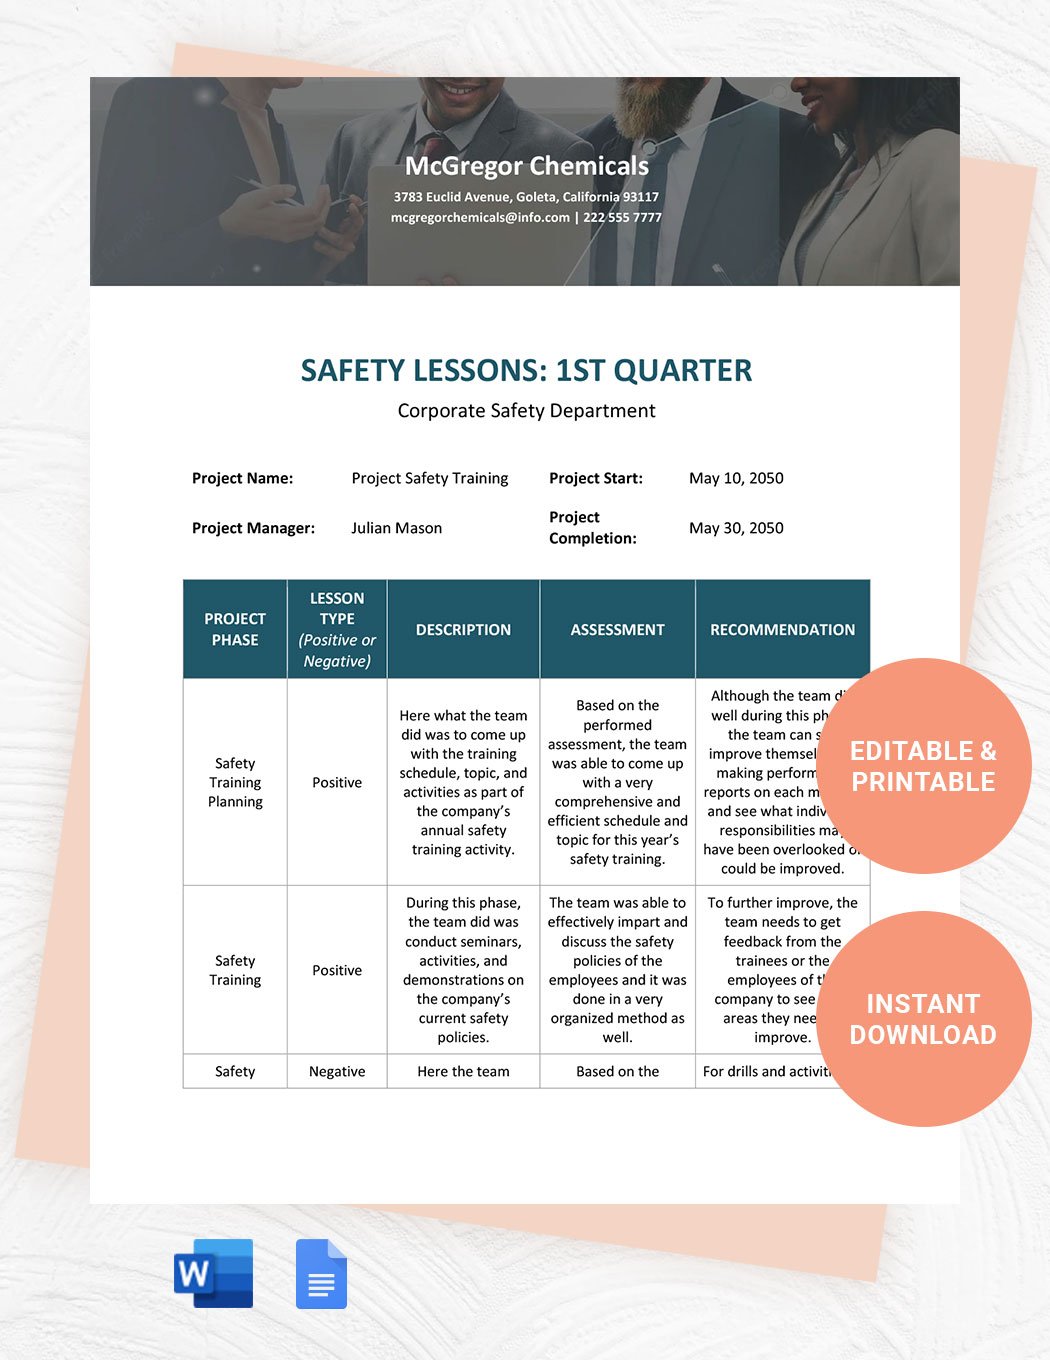 Safety Lessons Learned Template in Word, Google Docs